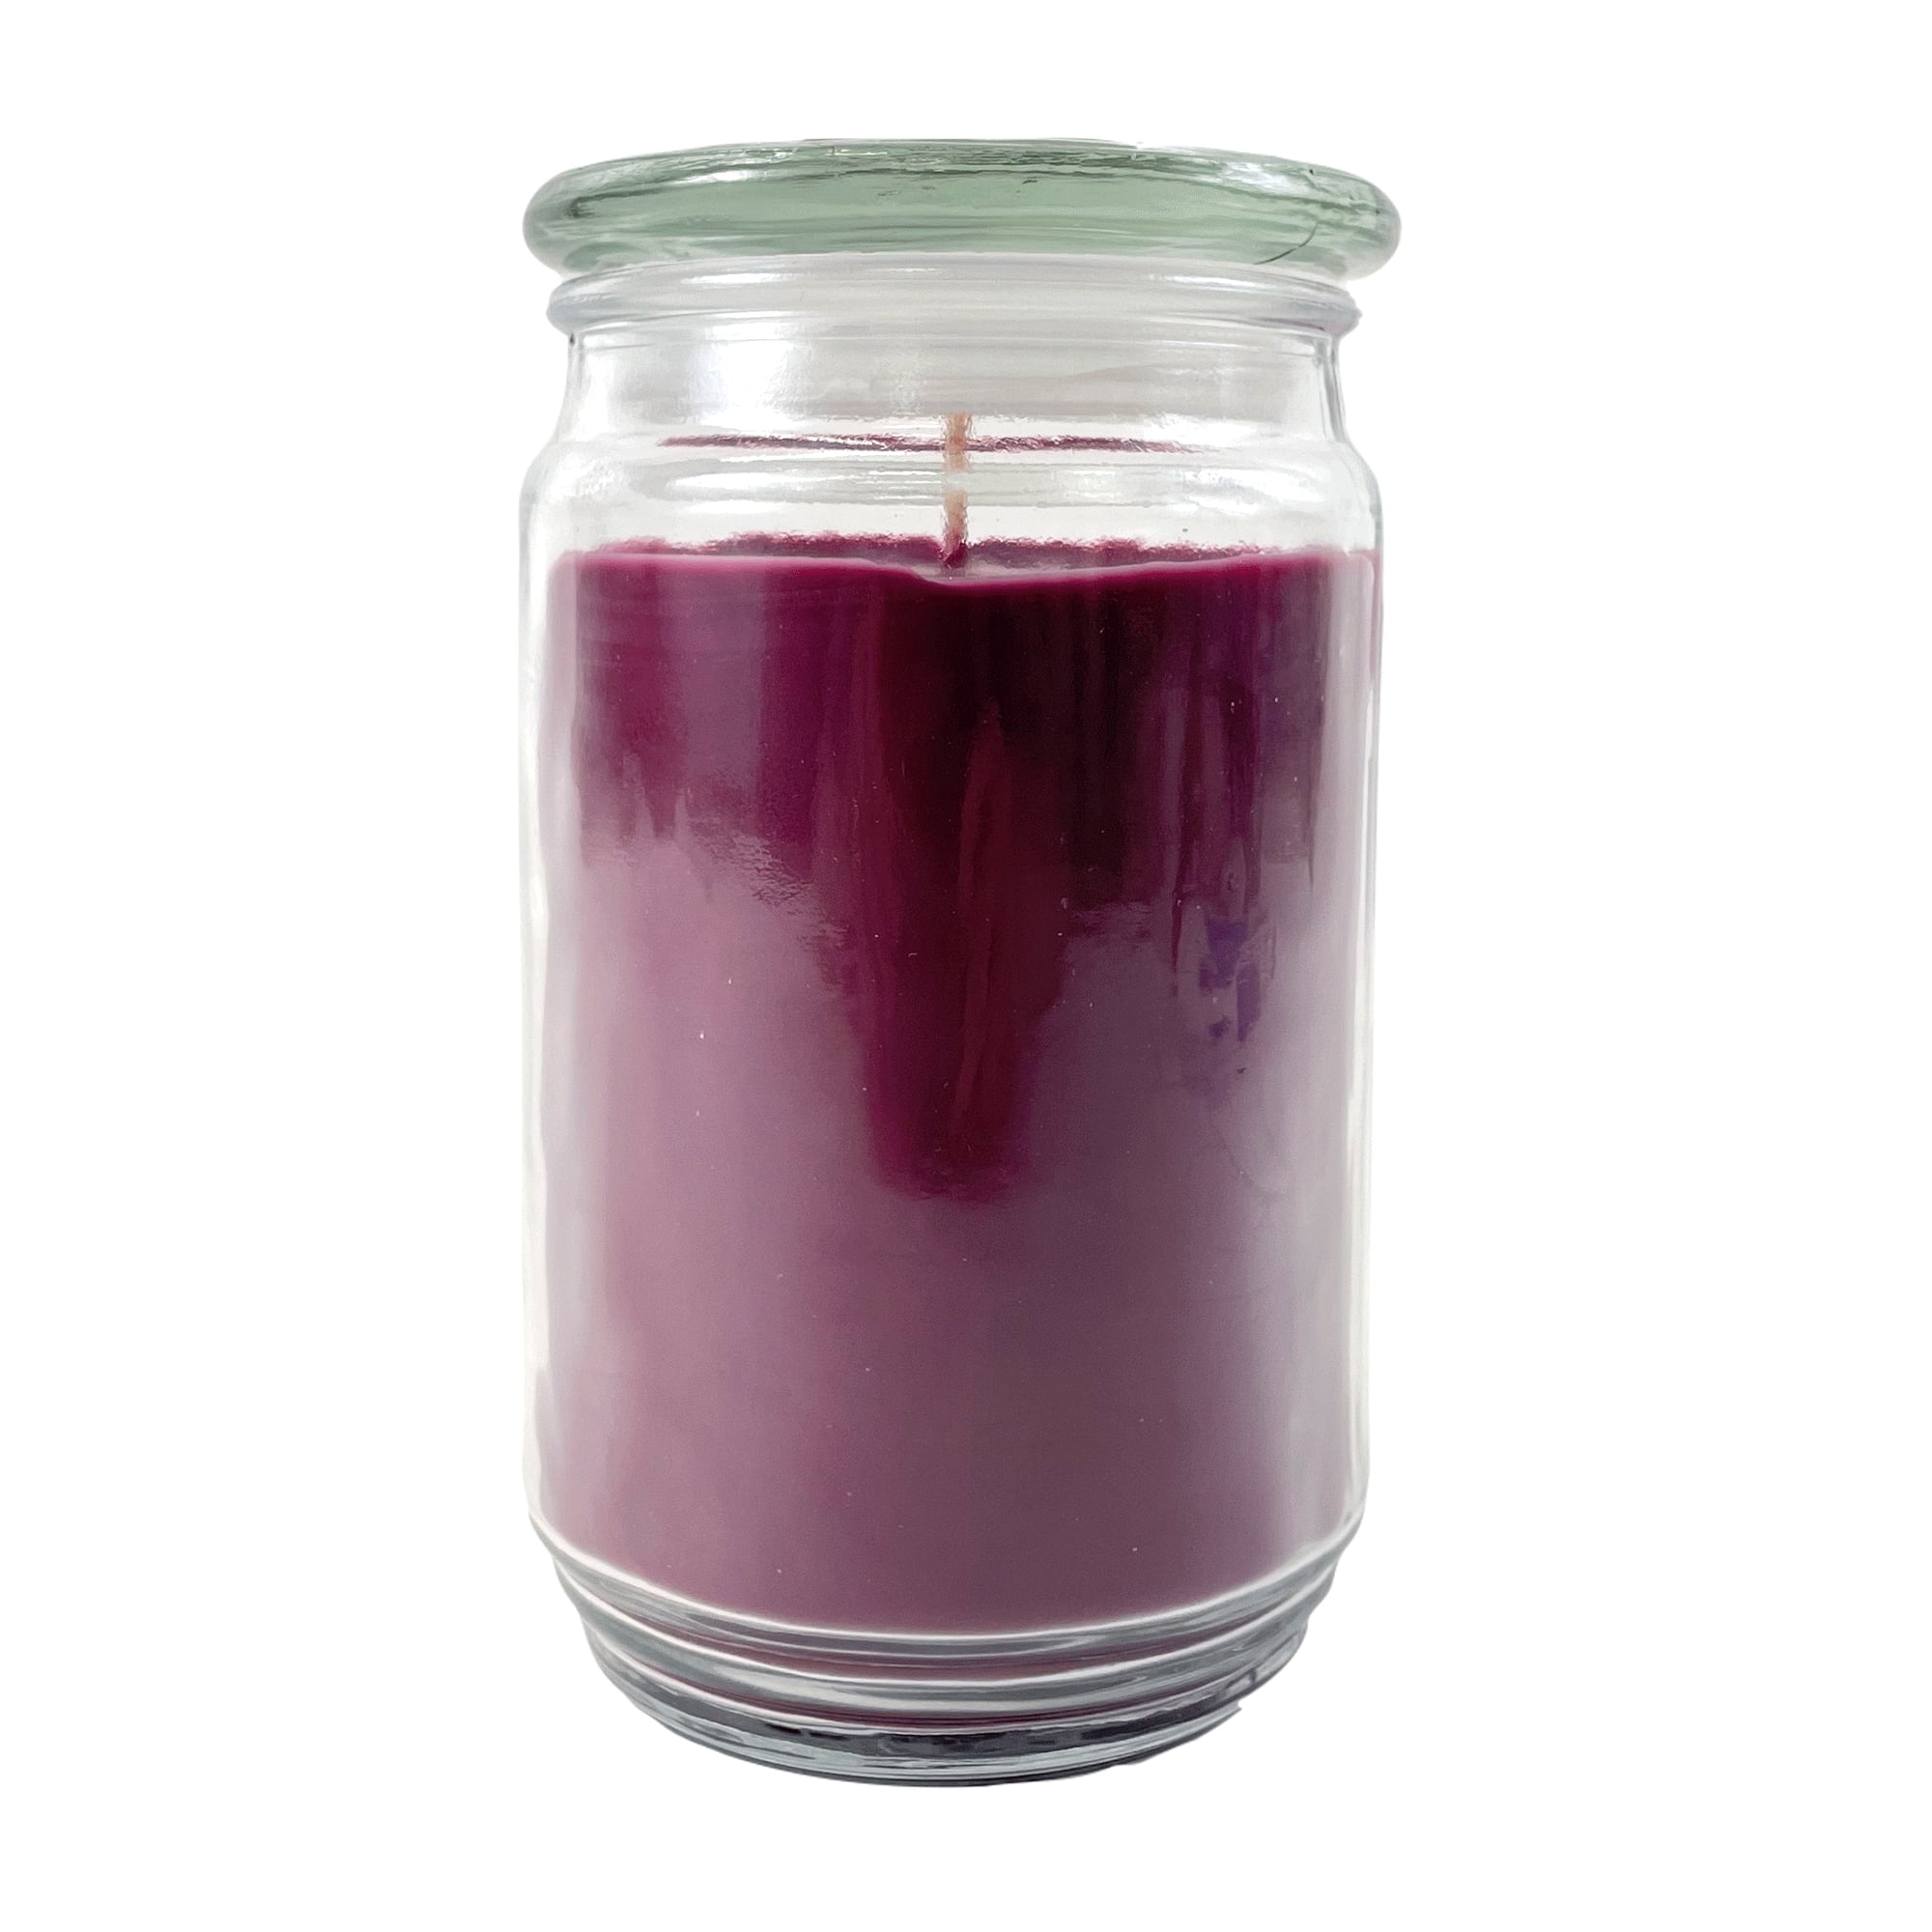 Blueberry 16oz Premium Glass Jar Candle – Maine Cabin Candle